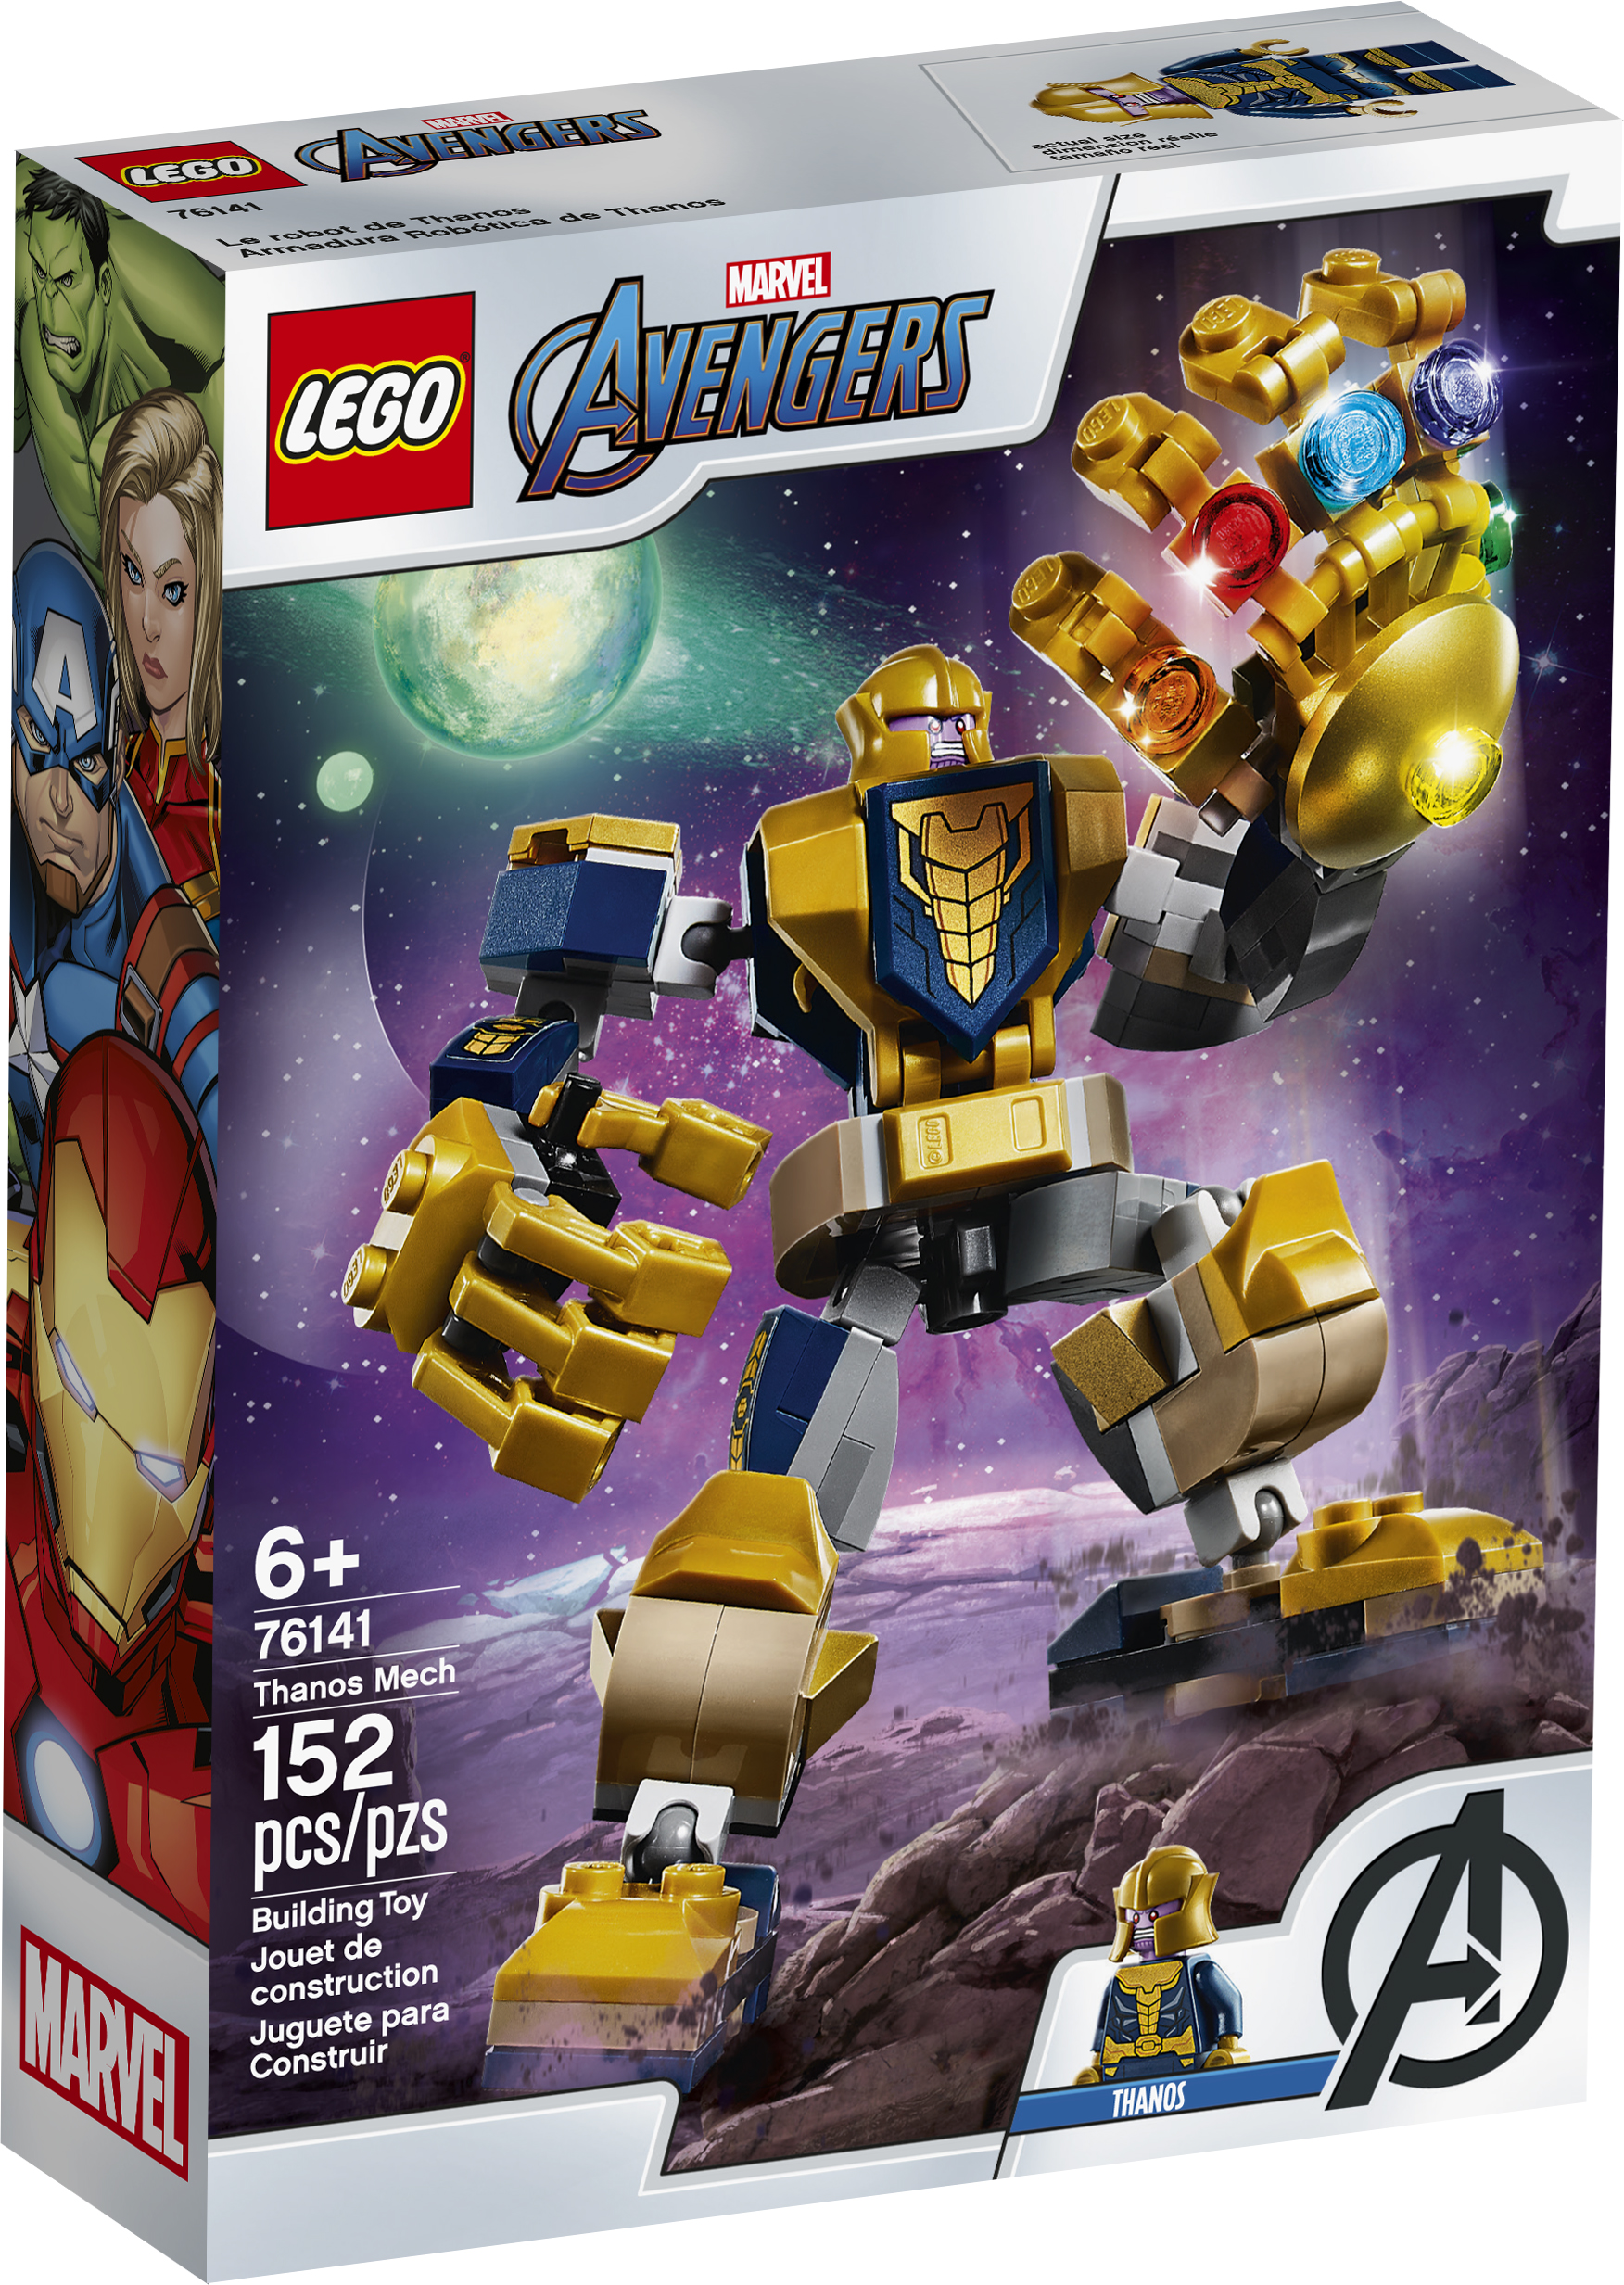 LEGO Super Heroes Avengers Thanos Mech 76141 - image 5 of 7